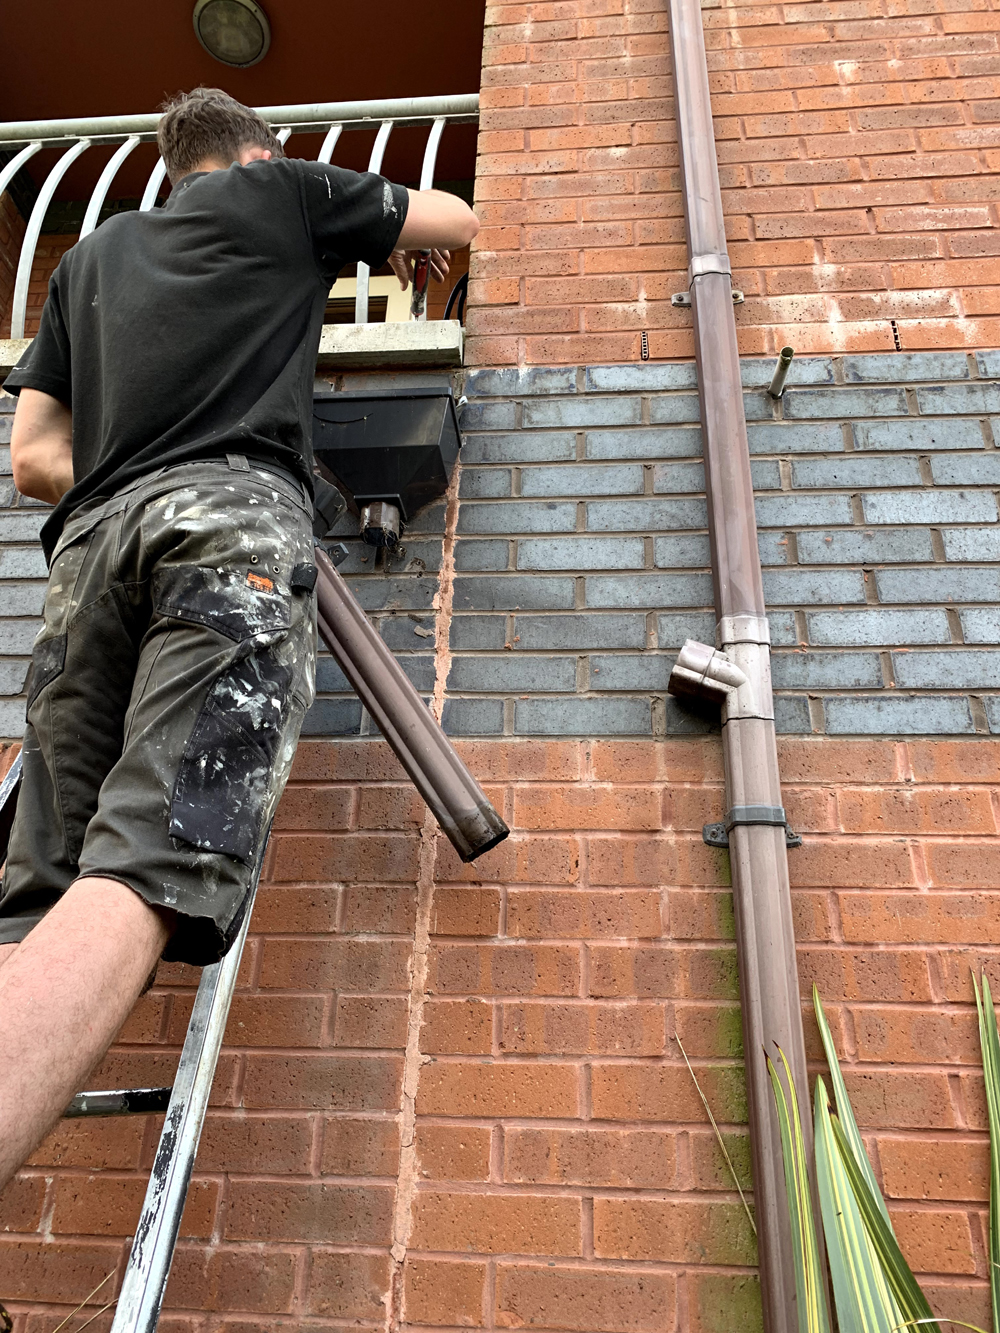 Gutter & downpipe cleaning, unblocking & repairs